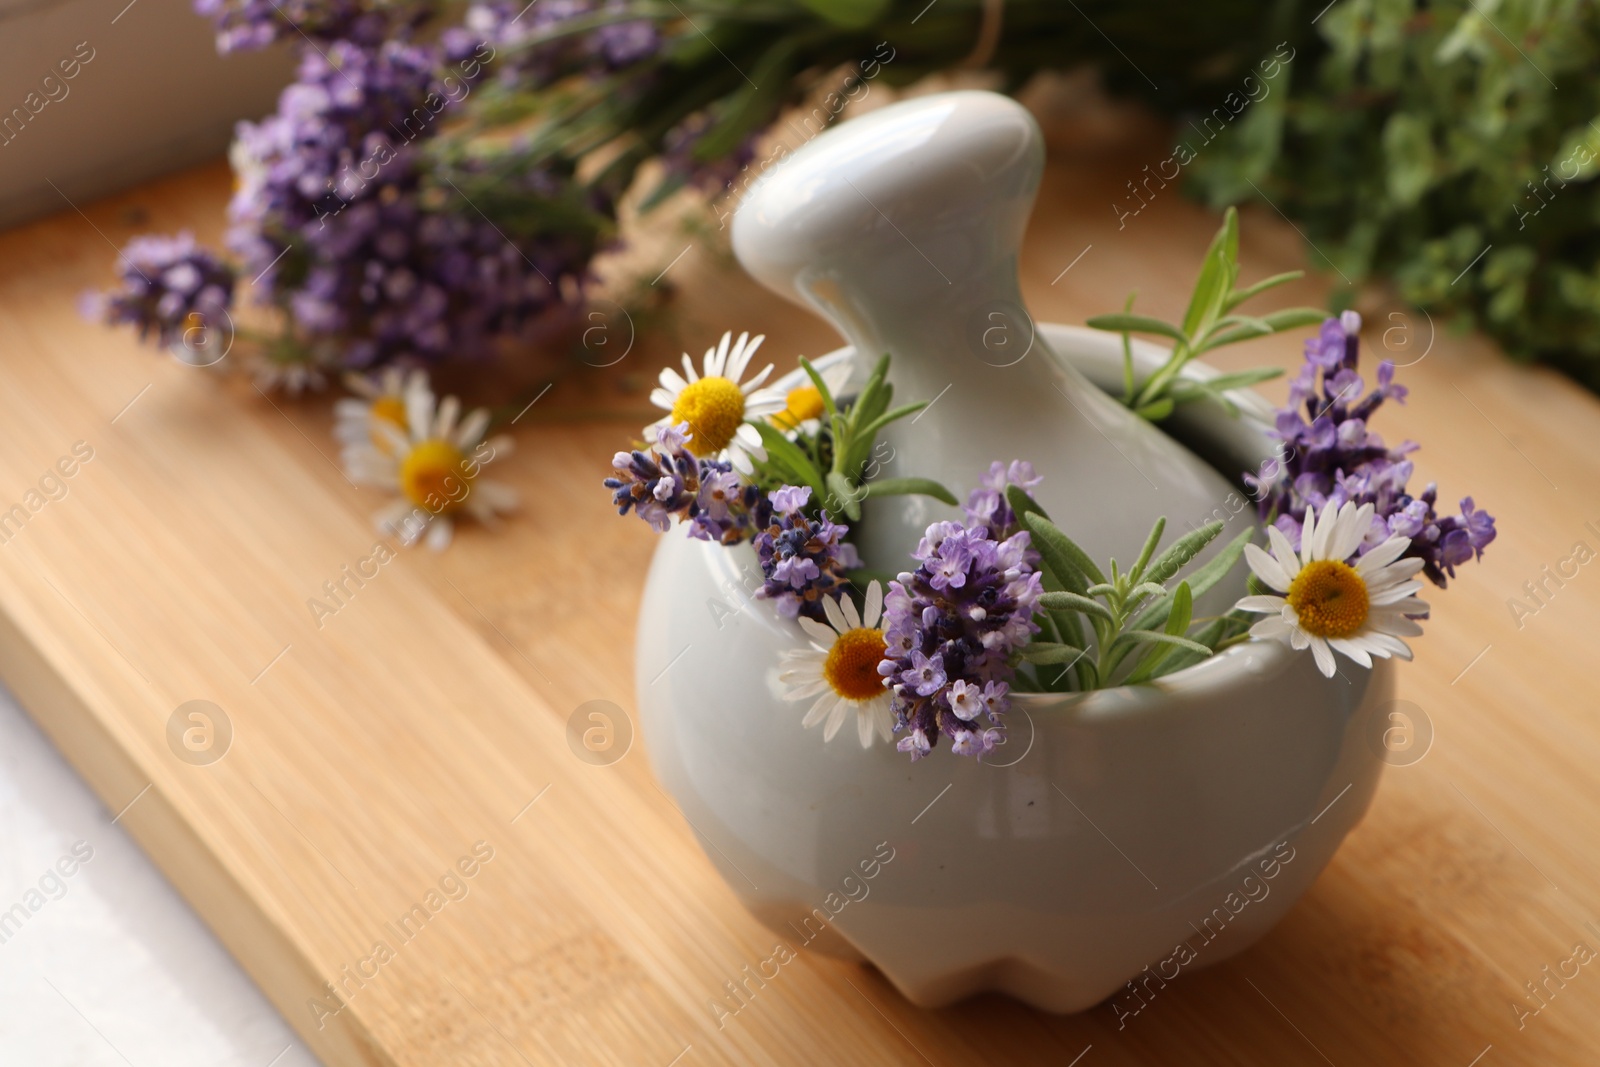 Photo of Mortar with fresh lavender, chamomile flowers, rosemary and pestle on wooden table, space for text